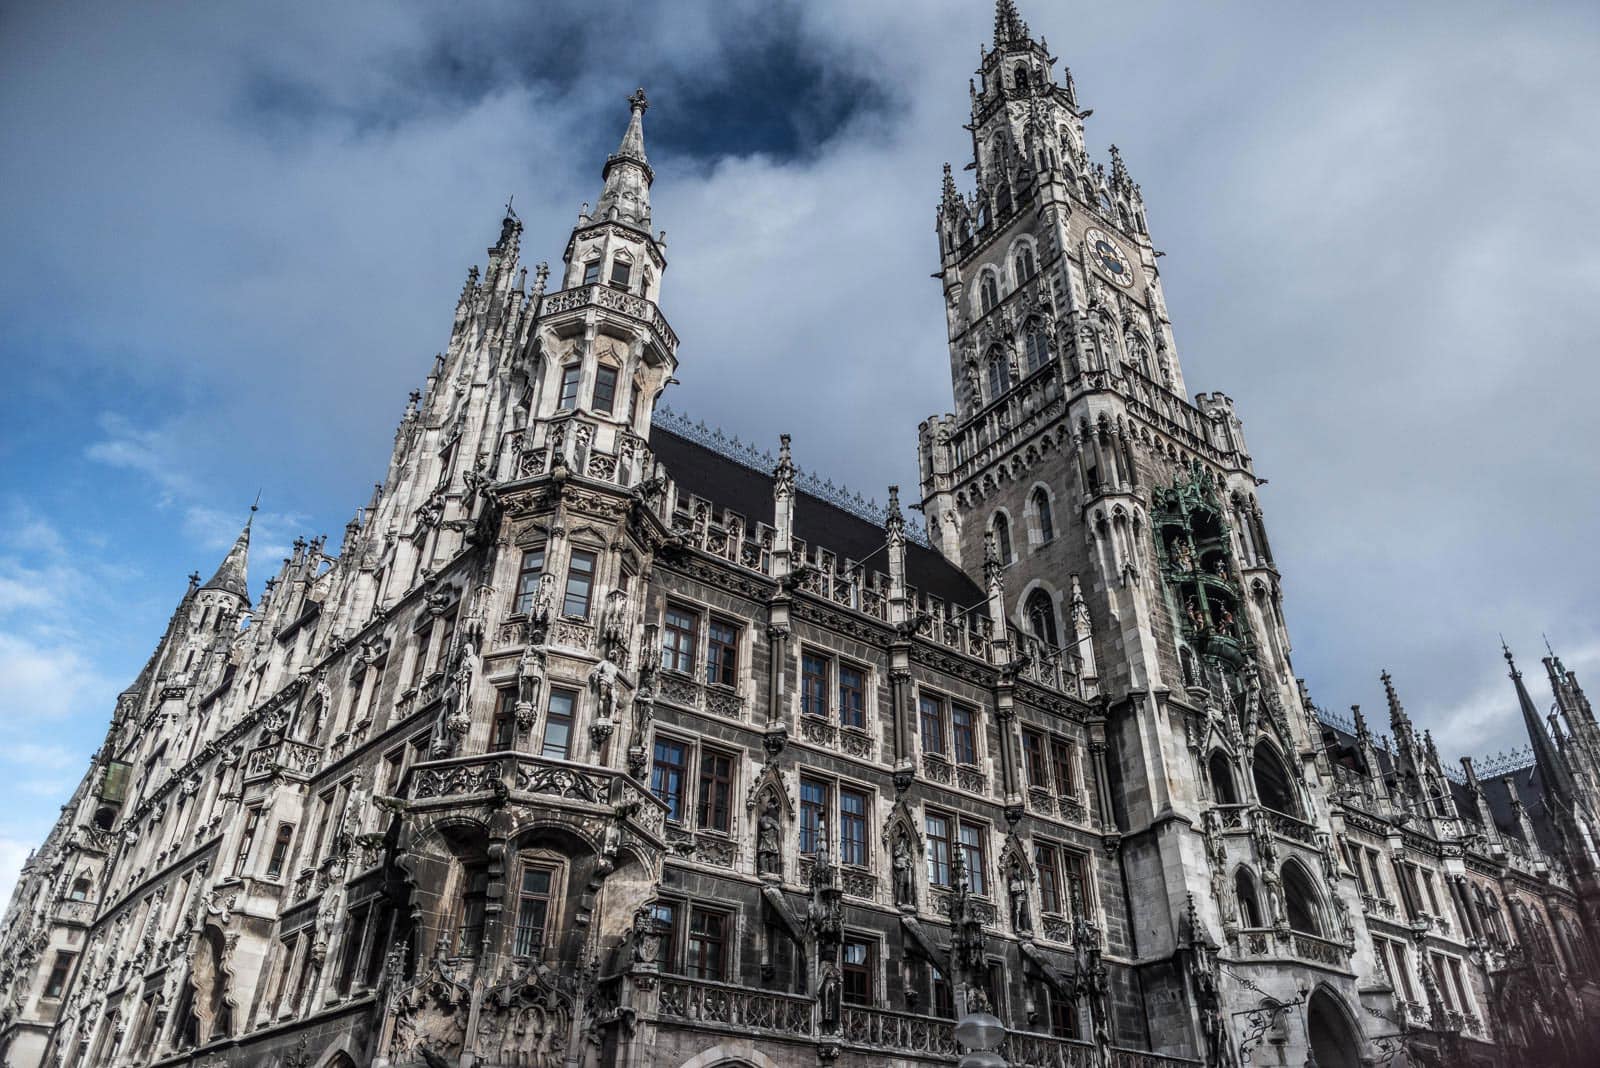 An ornate building in the city of munich.